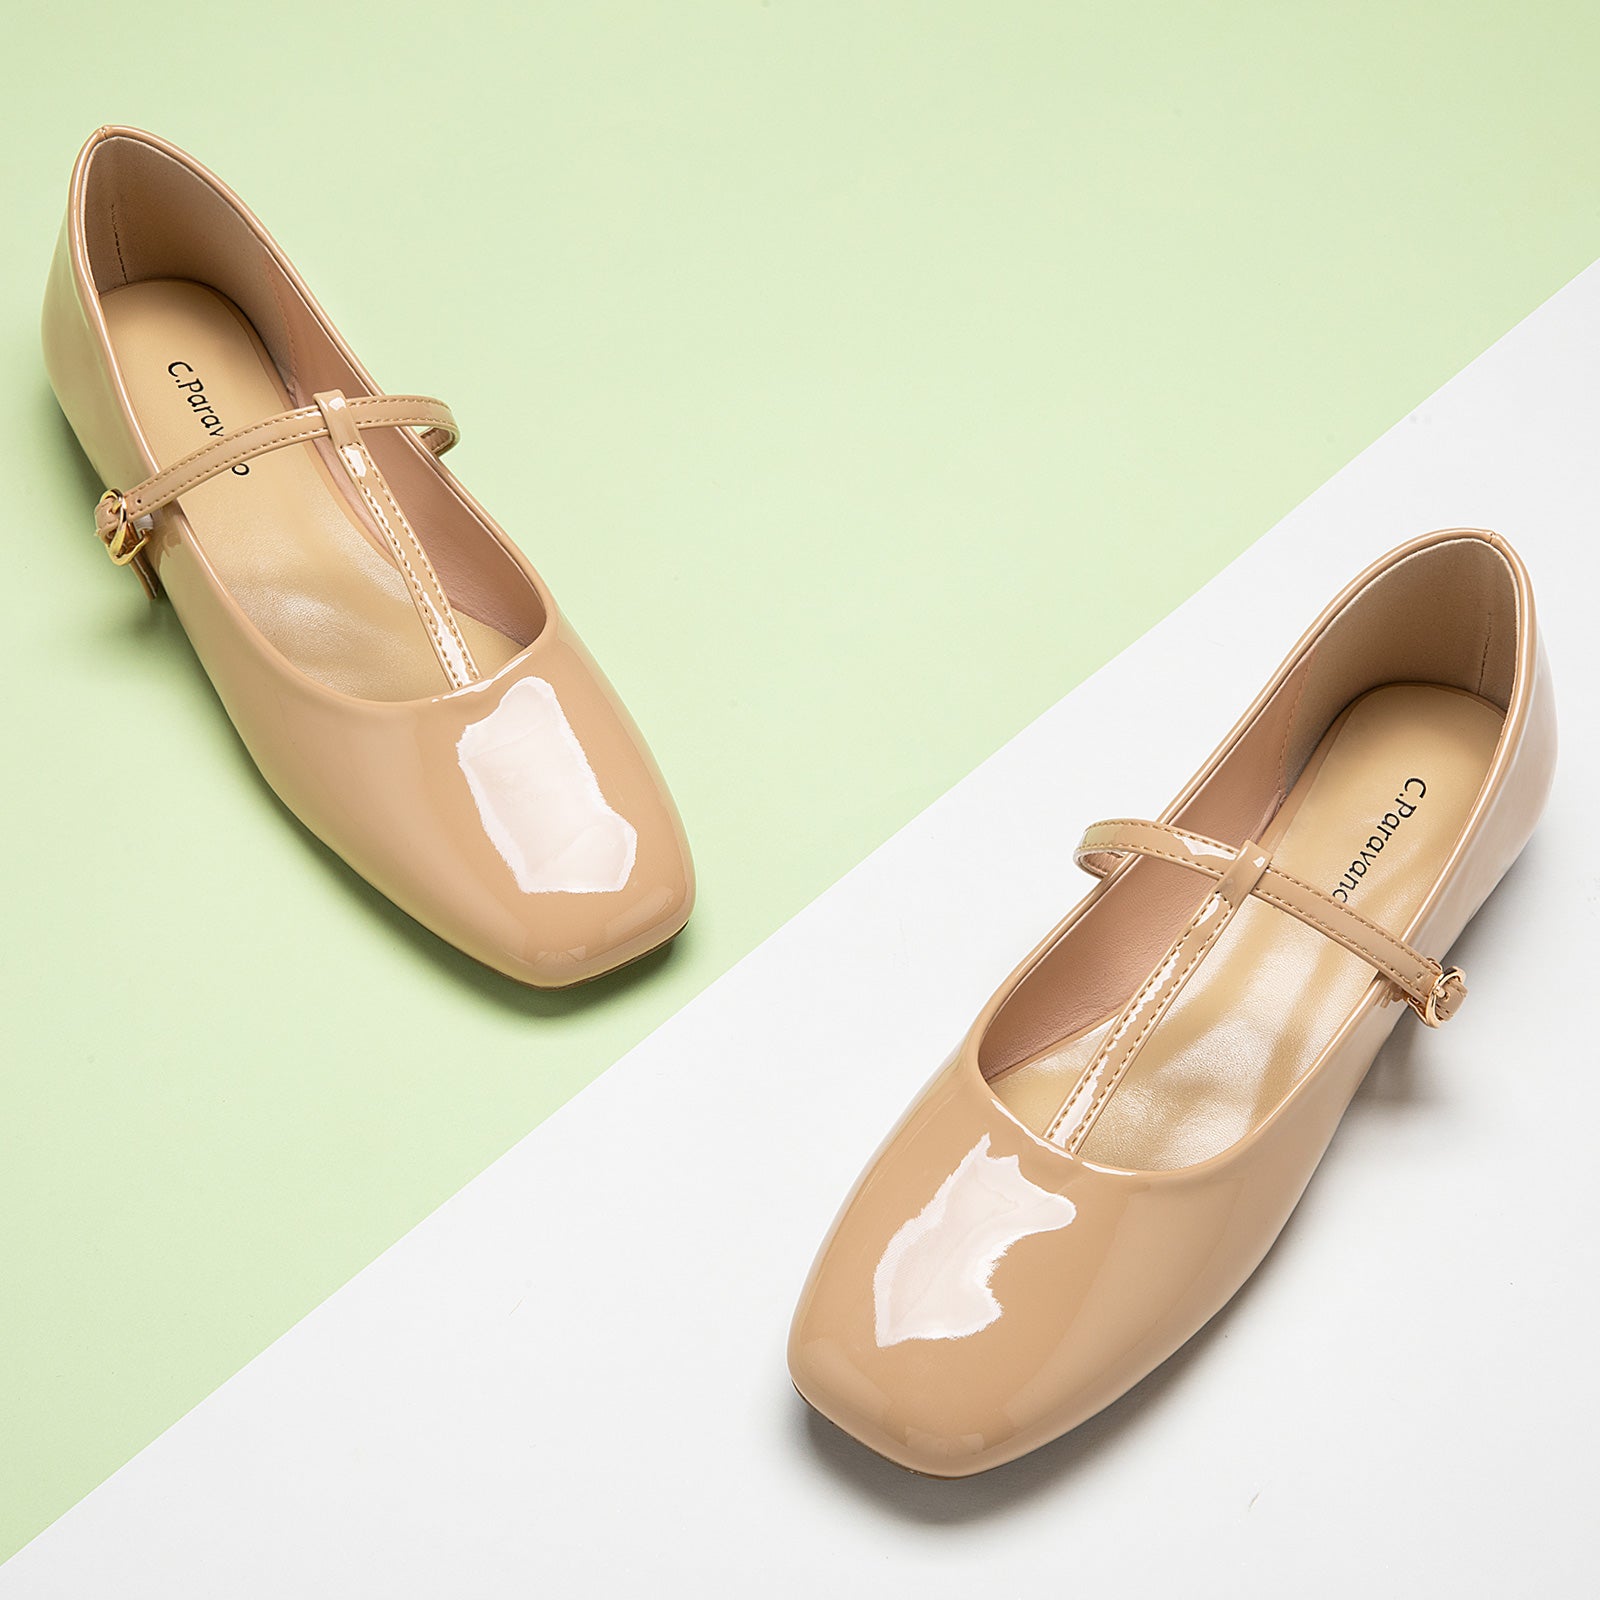 Mary Jane shoes in Beige with crossed stripes, featuring classic details for a refined and understated look